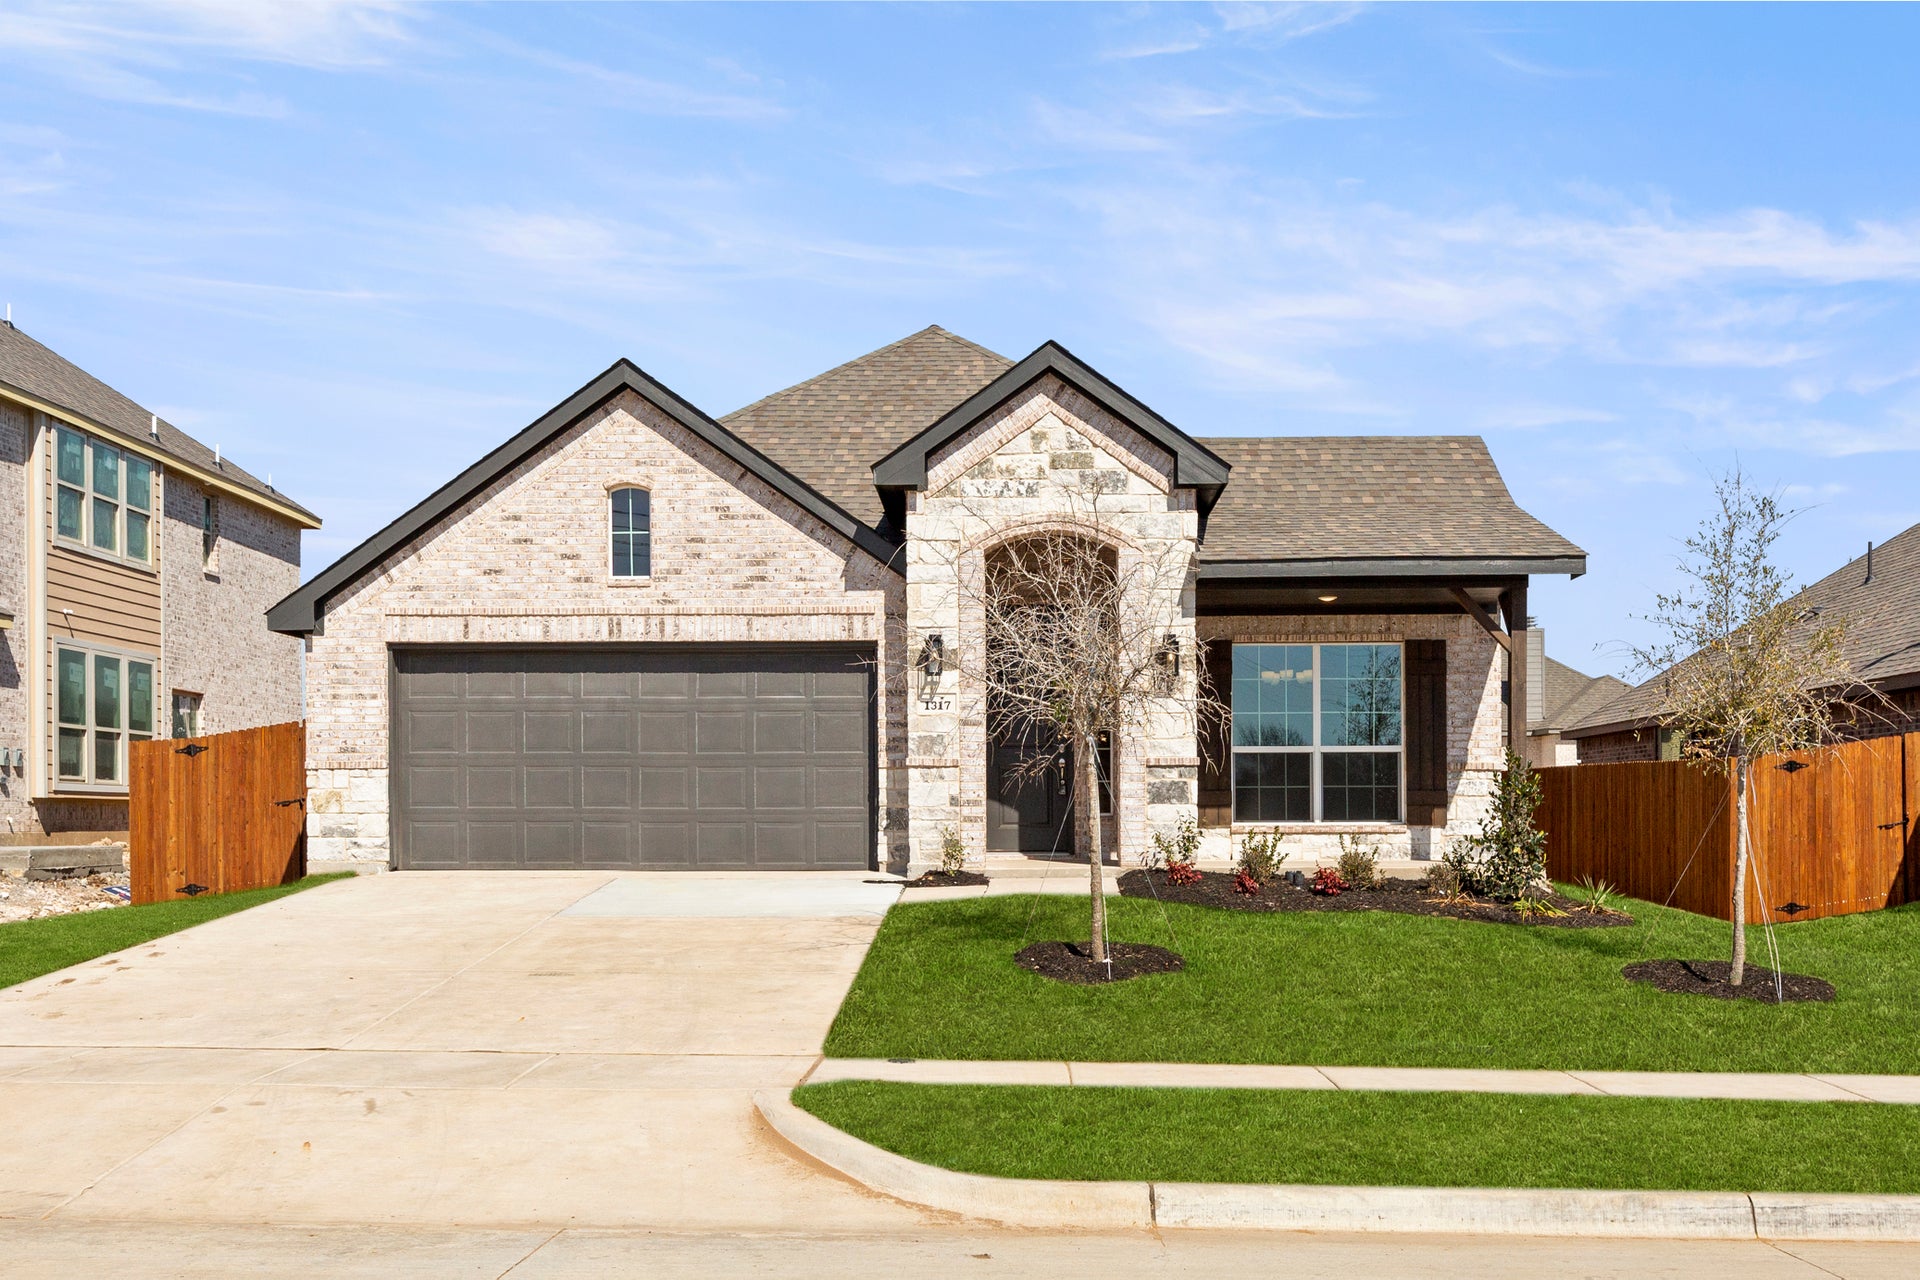 2065 C with Stone. 3br New Home in Fort Worth, TX